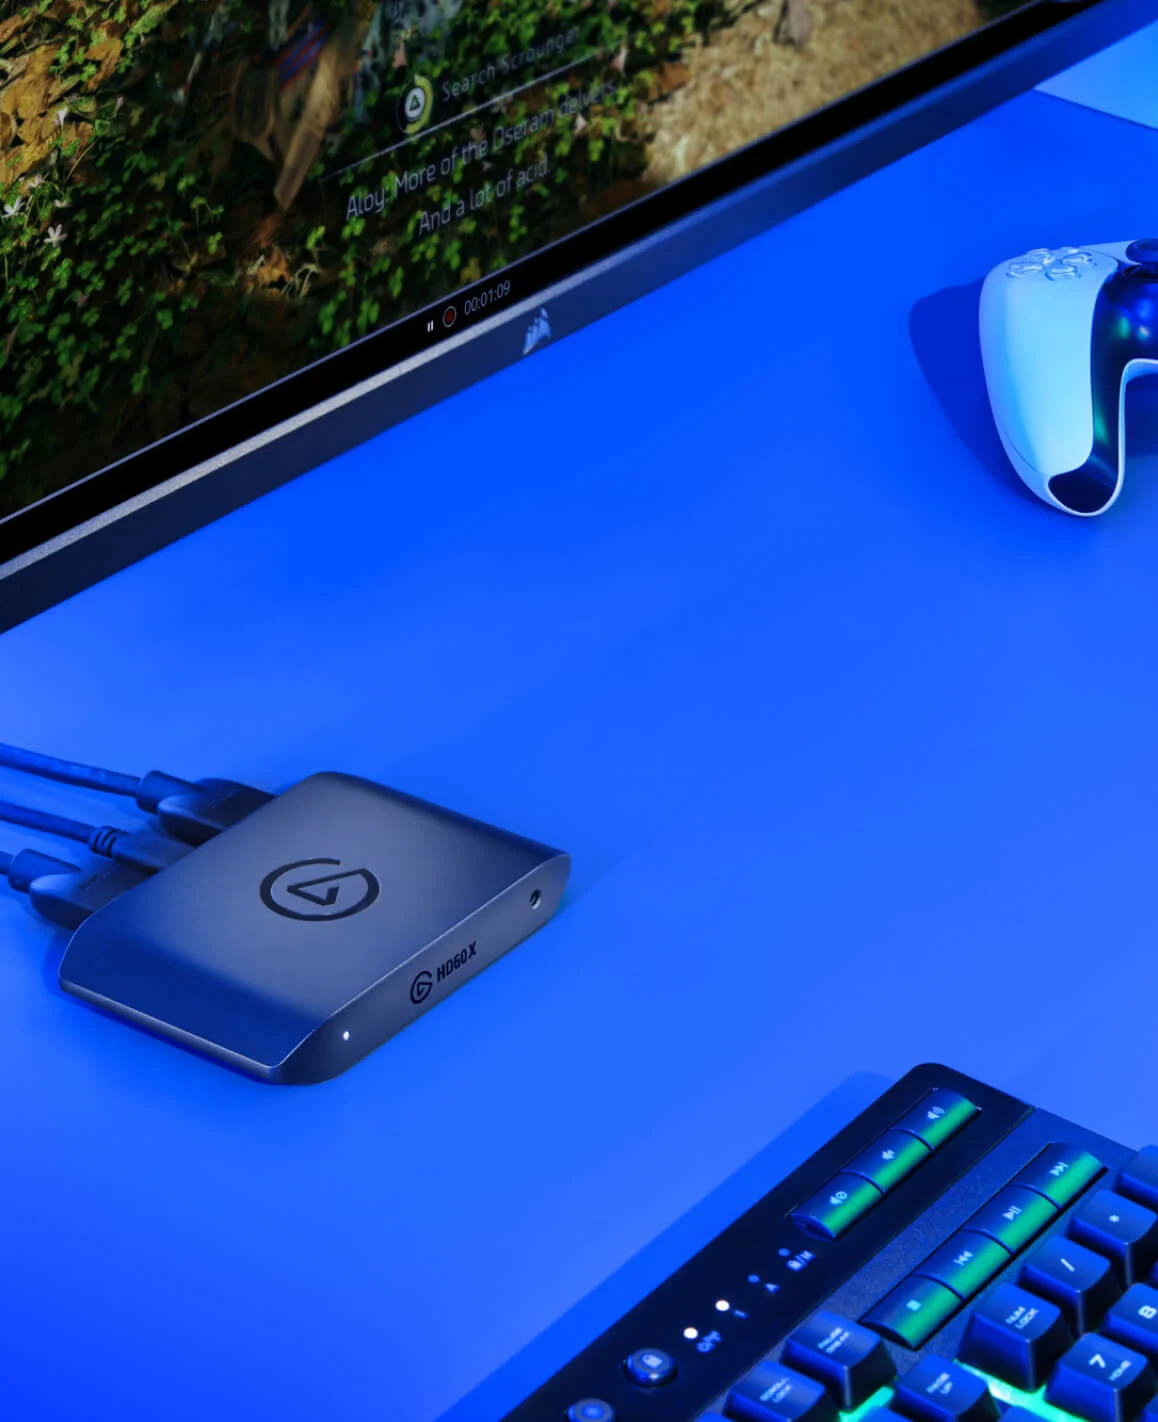 HD60 X on a blue table next to a controller and a keyboard